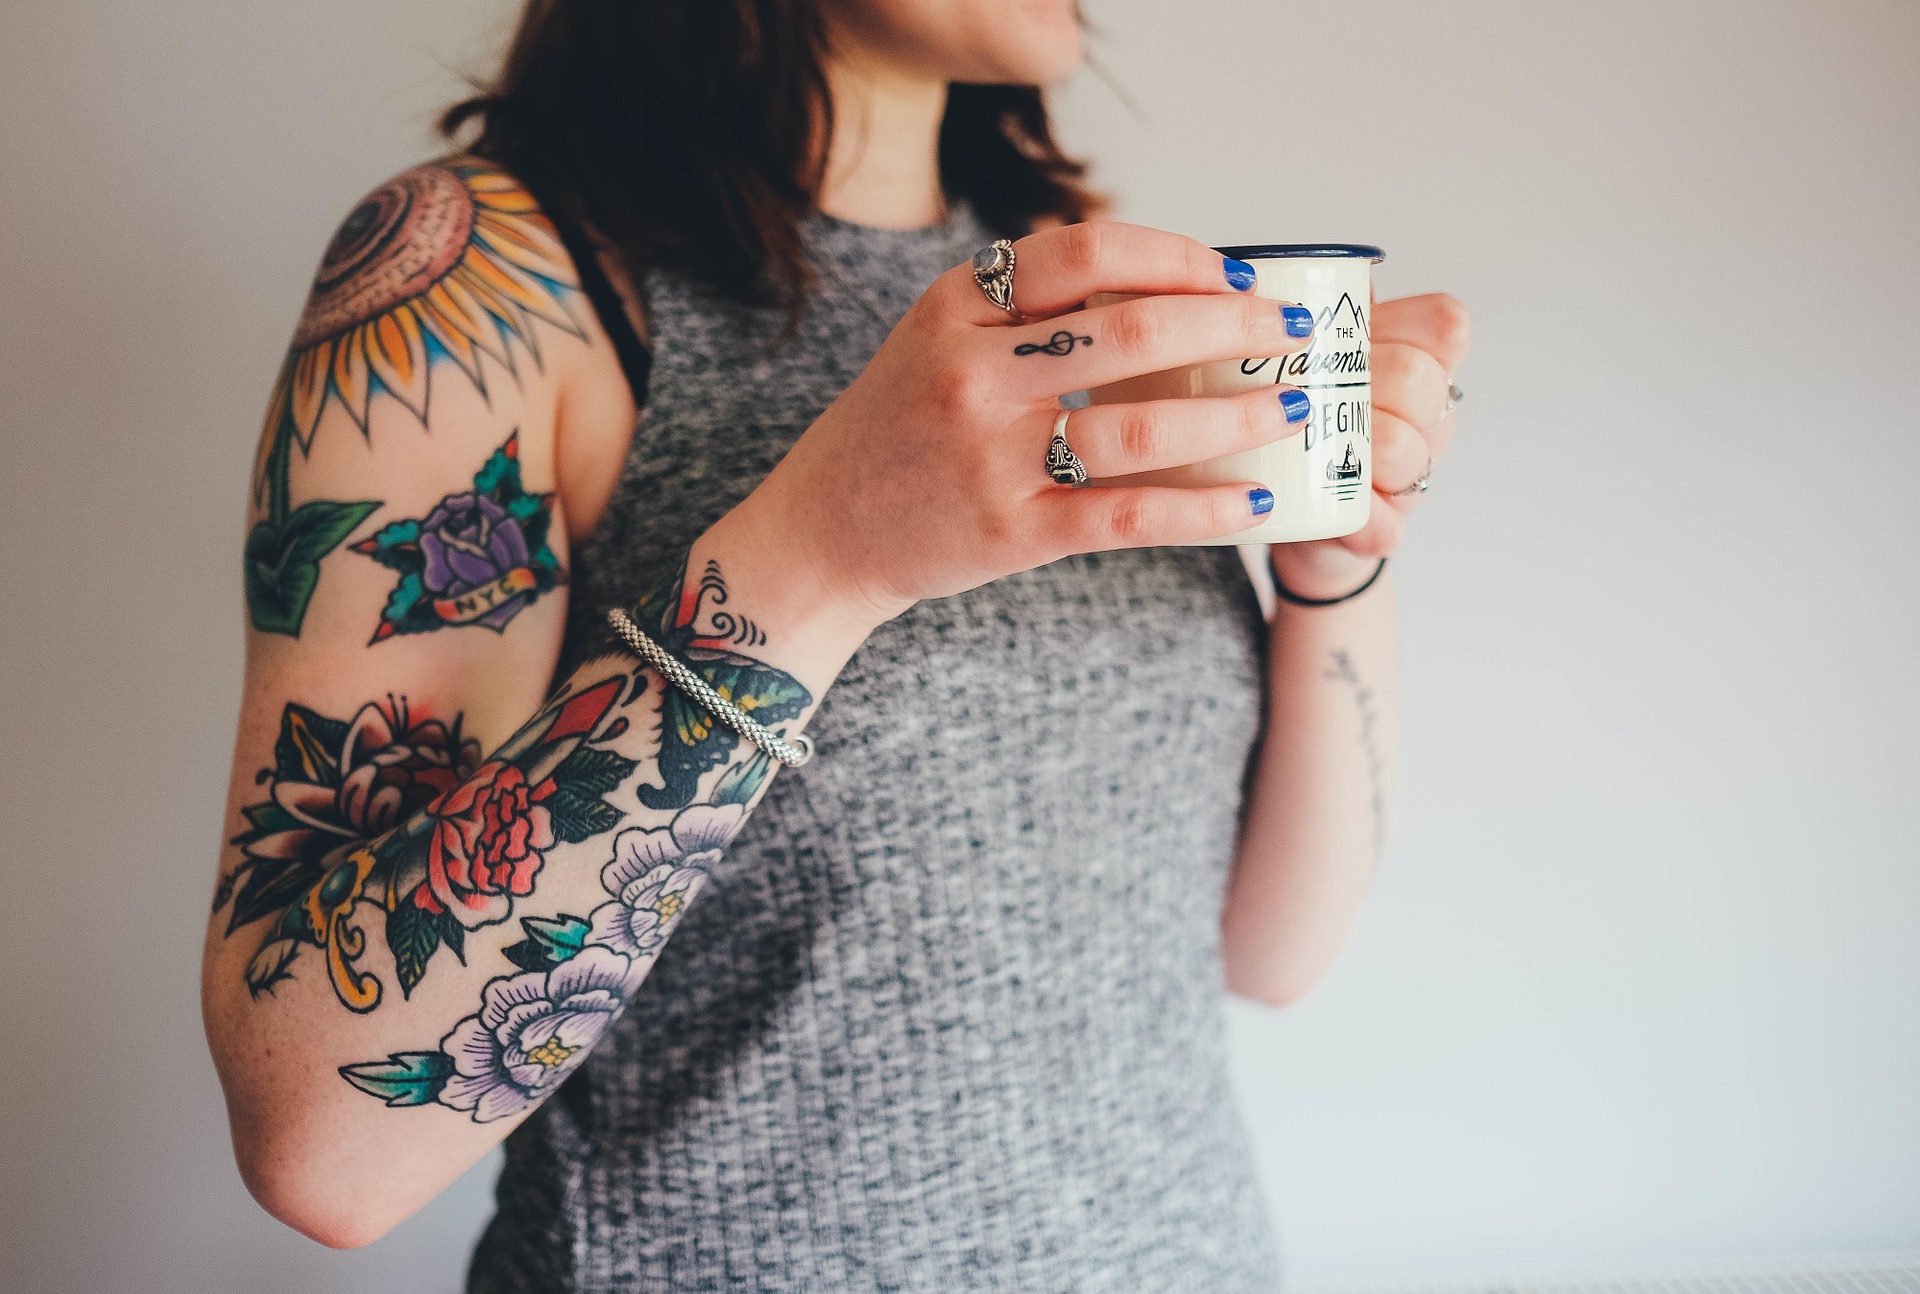 Top 45 Classy Female Half Sleeve Tattoos To Make You Look Outstanding